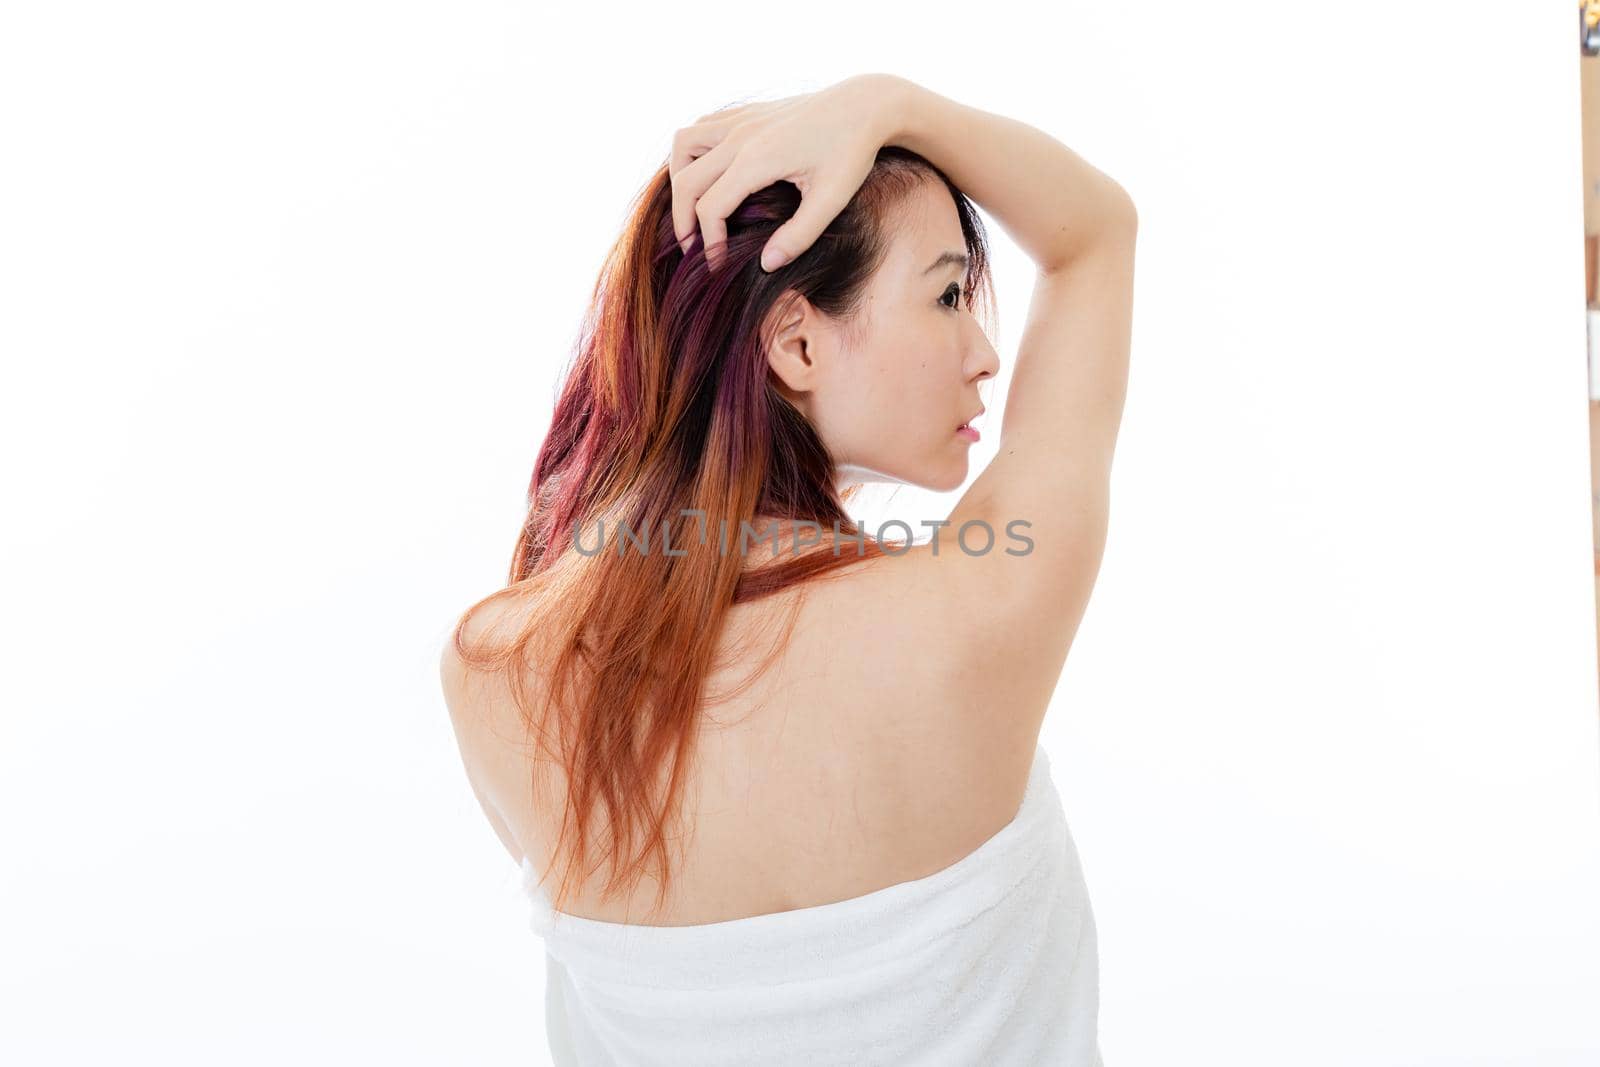 Chinese American woman wearing a white towel, beauty concept, back facing camera by imagesbykenny